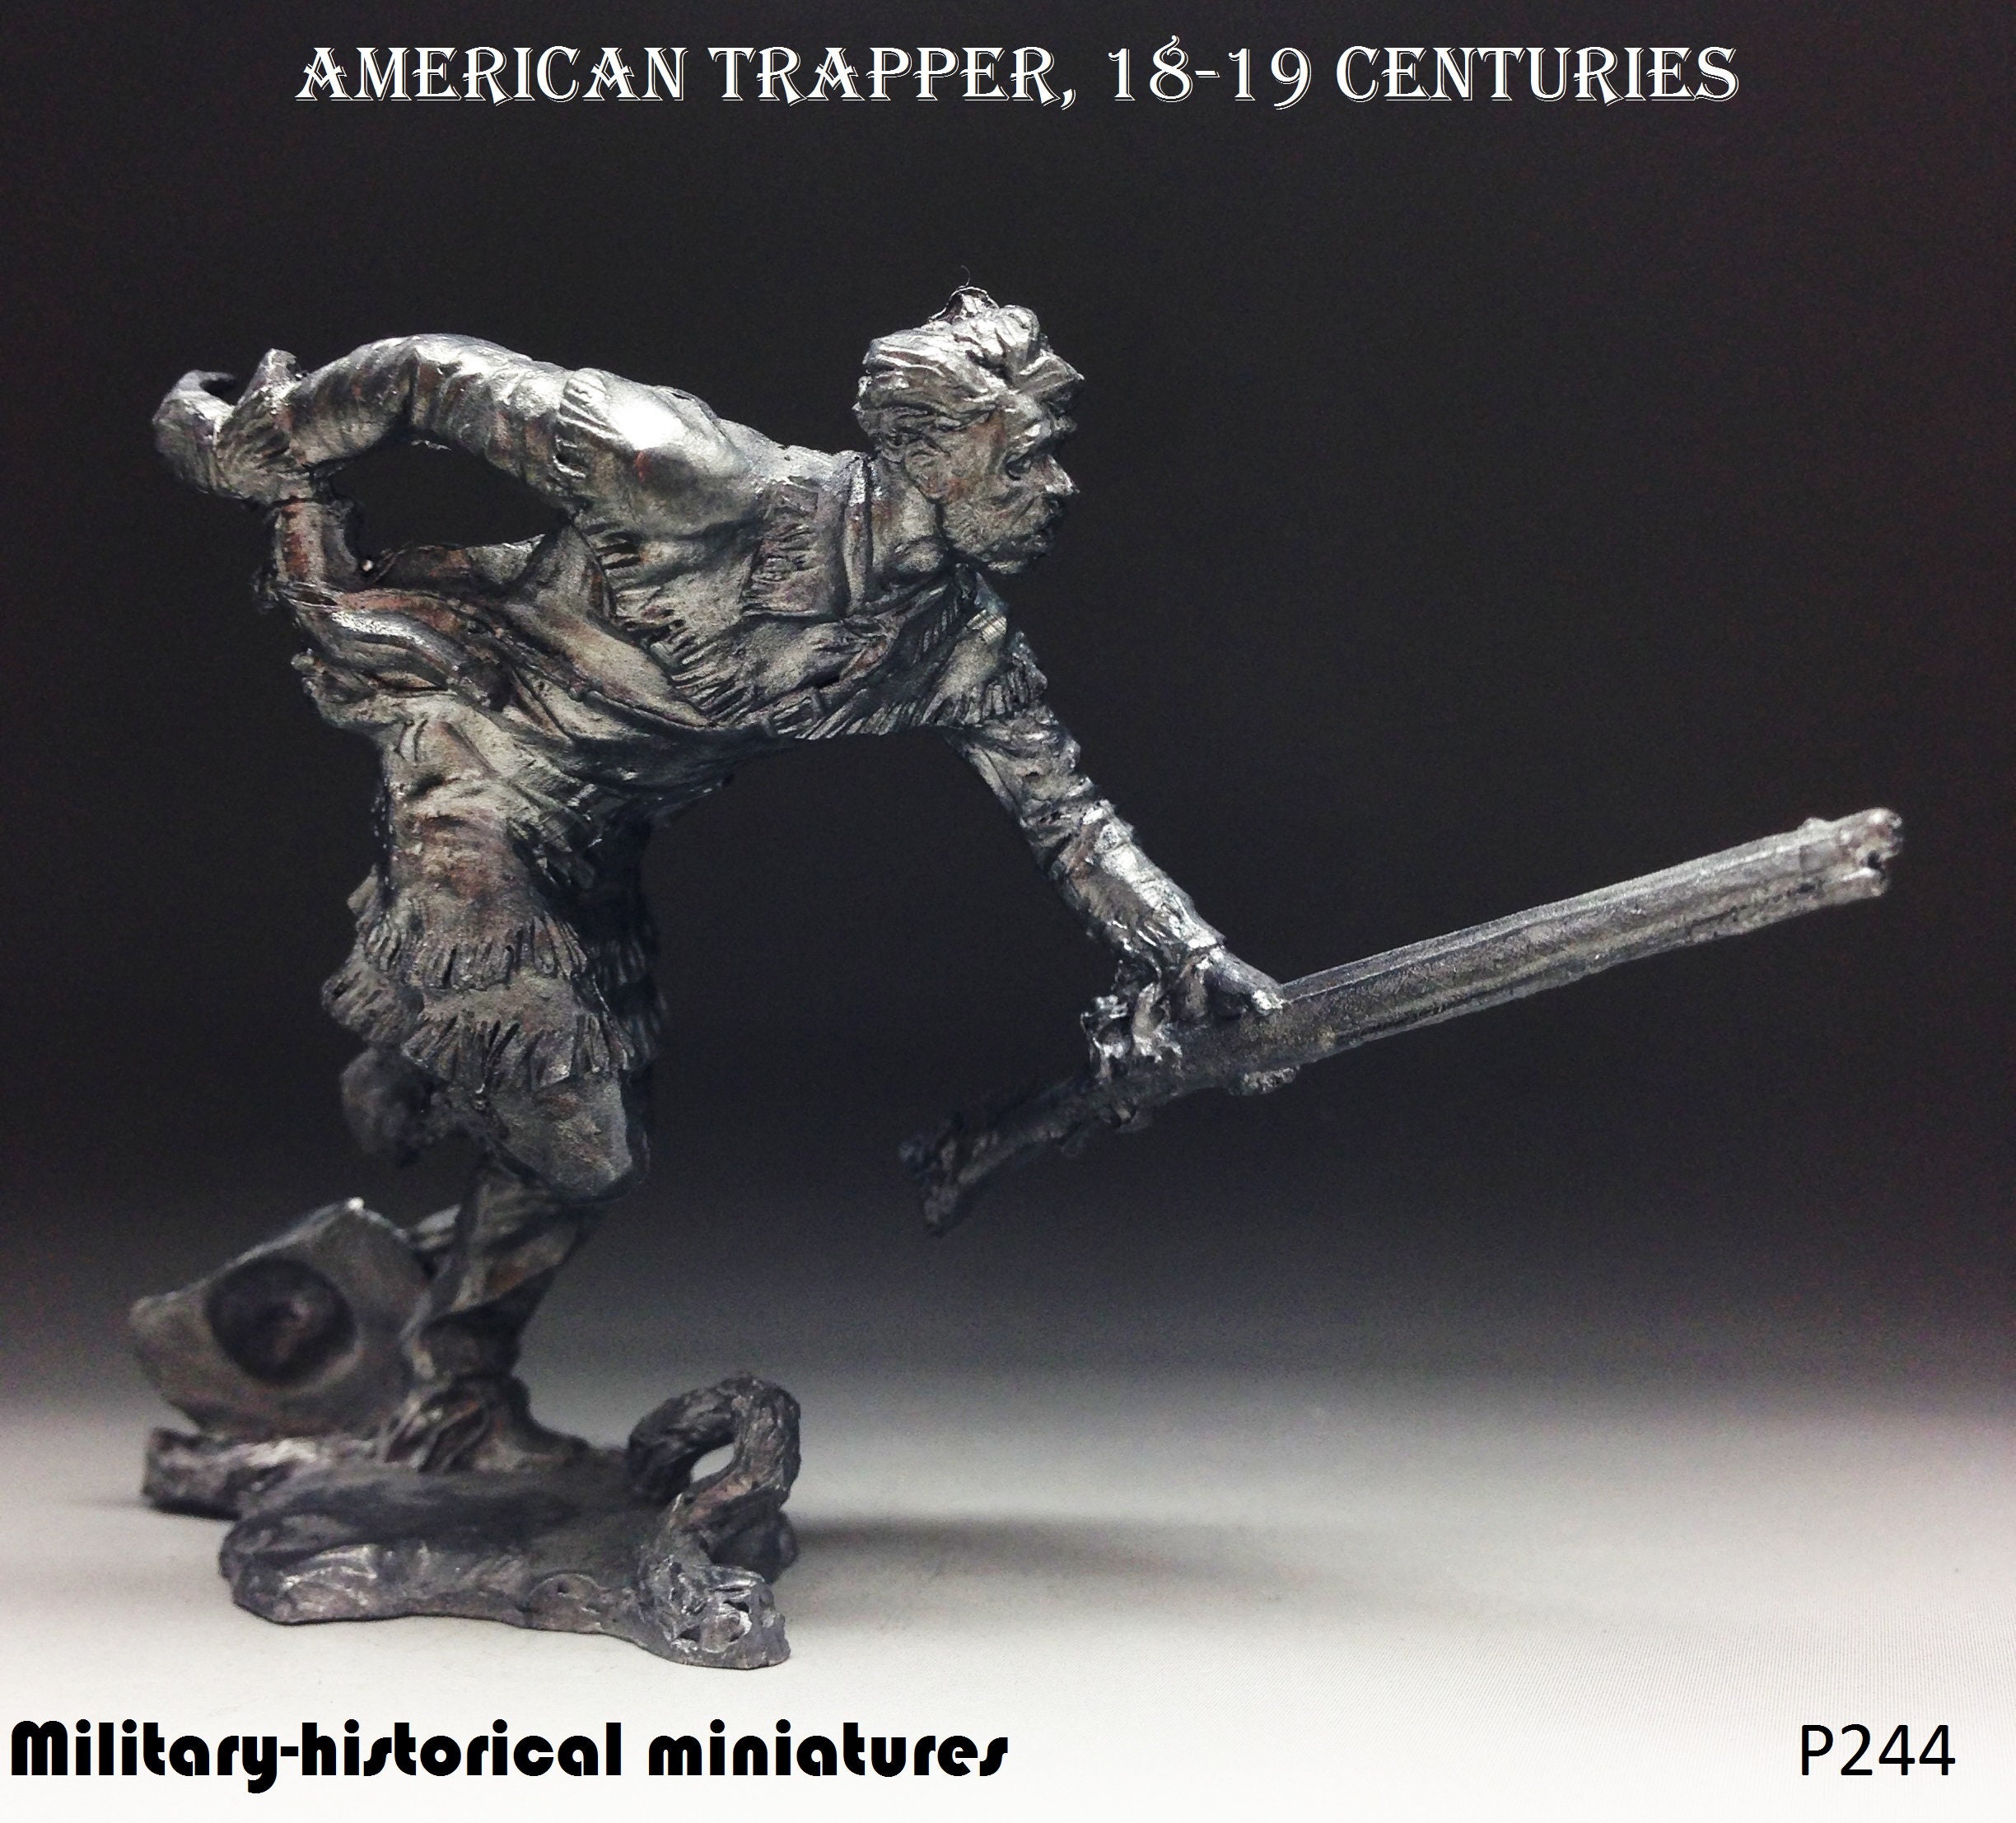 M275 Scale 1/32 Russian Warrior Tin Soldiers Metal Sculpture Miniature Figure Collection 54mm